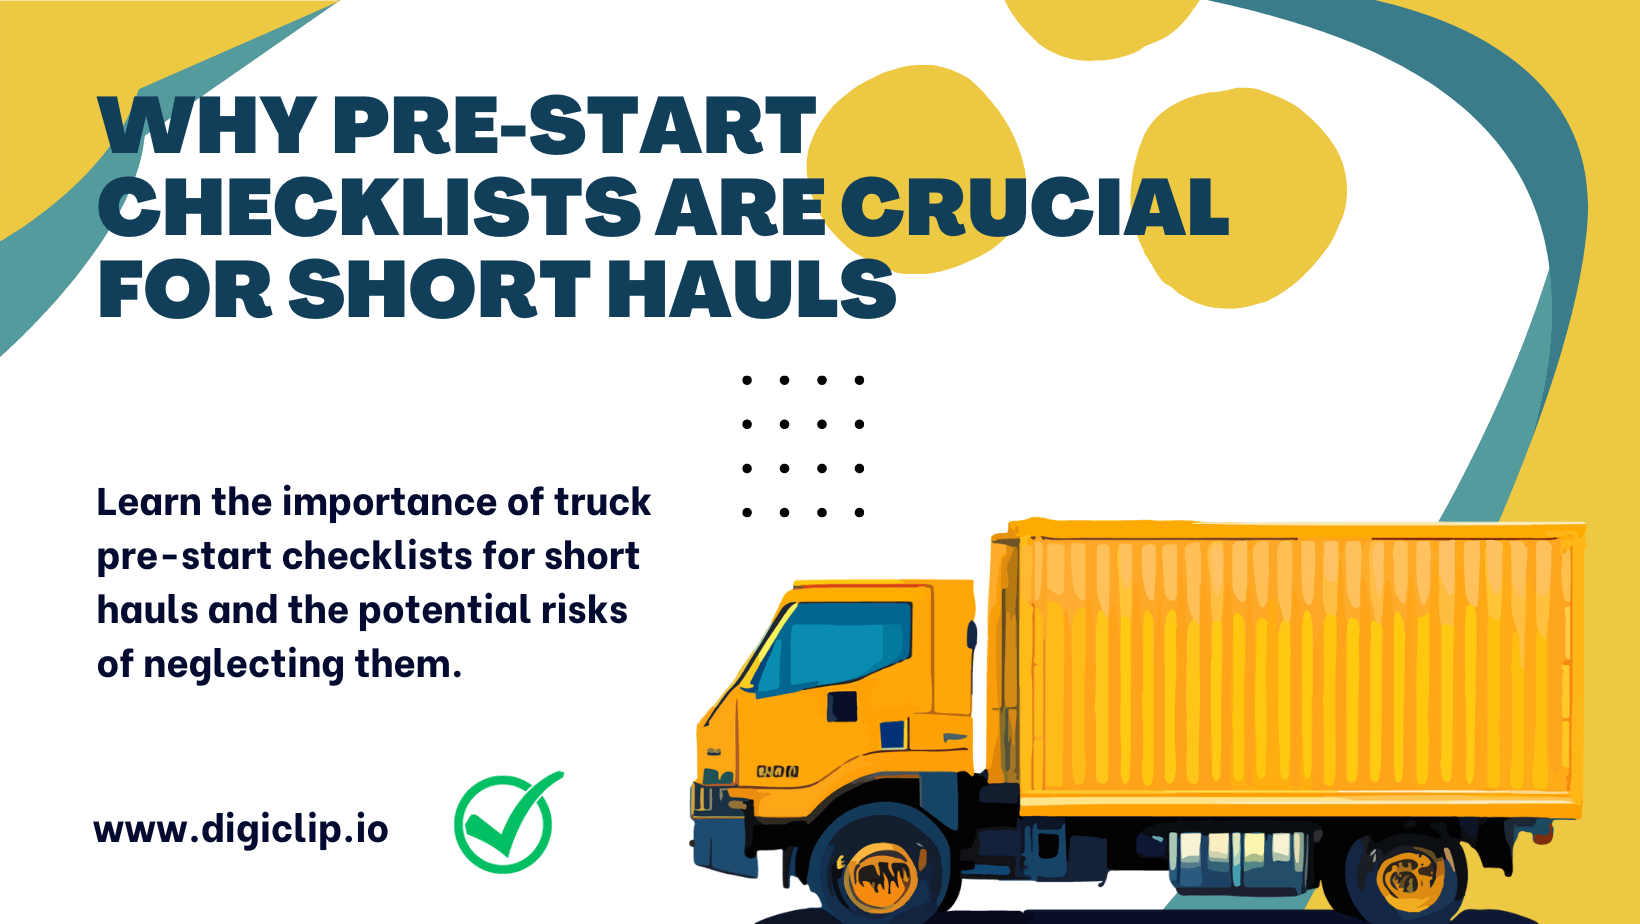 Why Pre-Start Checklists are Crucial for Short Hauls